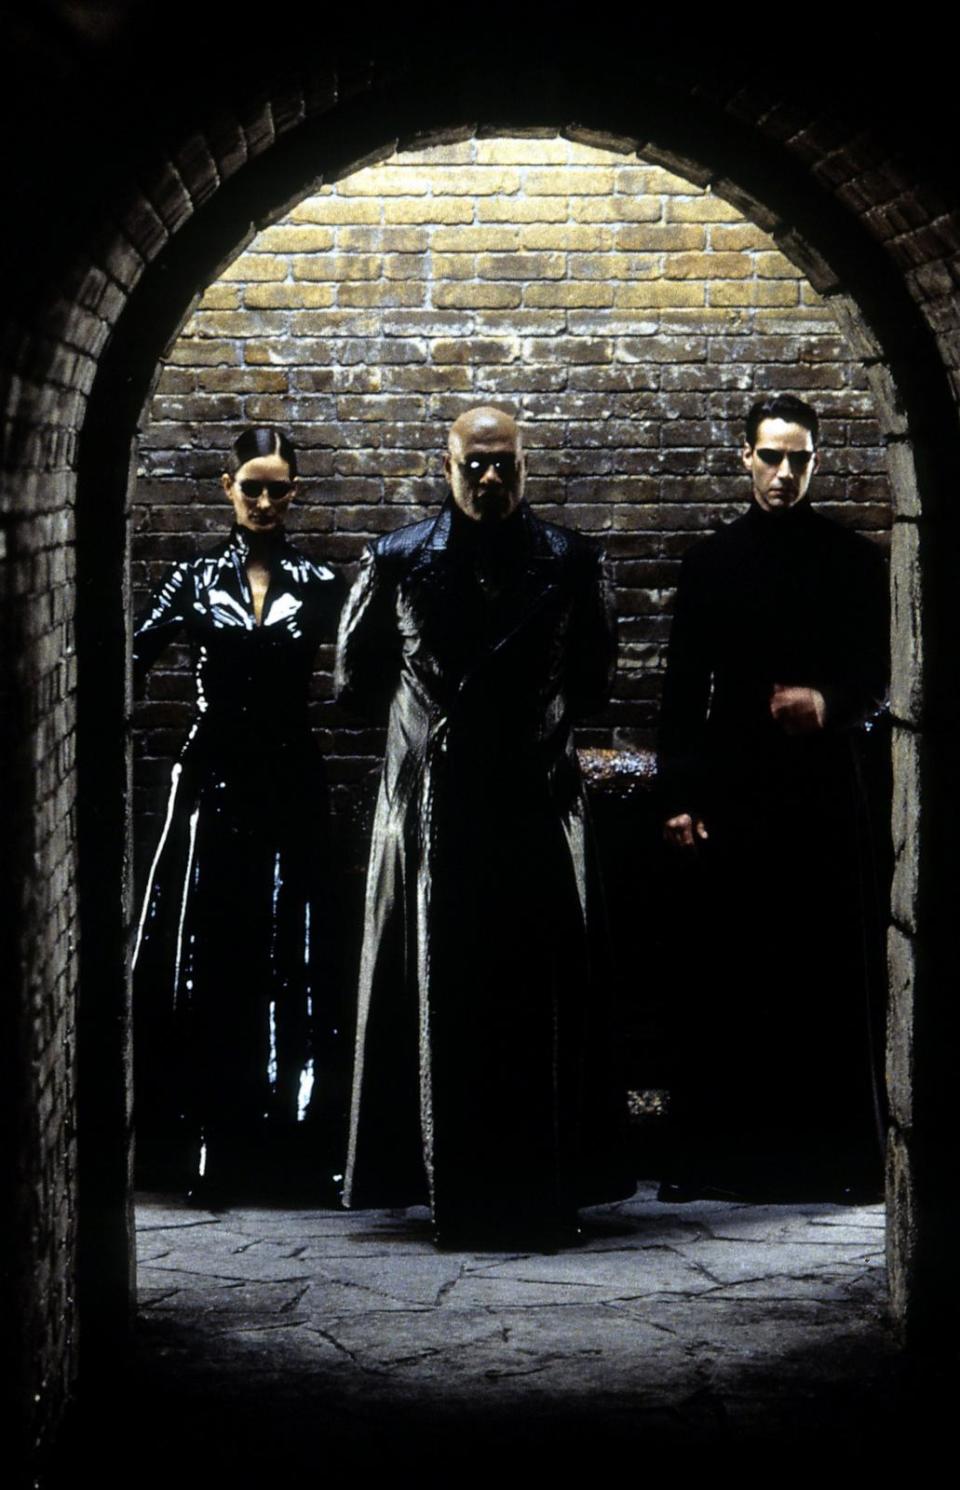 PHOTO: Carrie-Anne Moss, Laurence Fishburne, and Keanu Reeves standing against brick wall in a scene from the film 'The Matrix Reloaded', 2003. (Archive Photos via Getty Images, FILE)